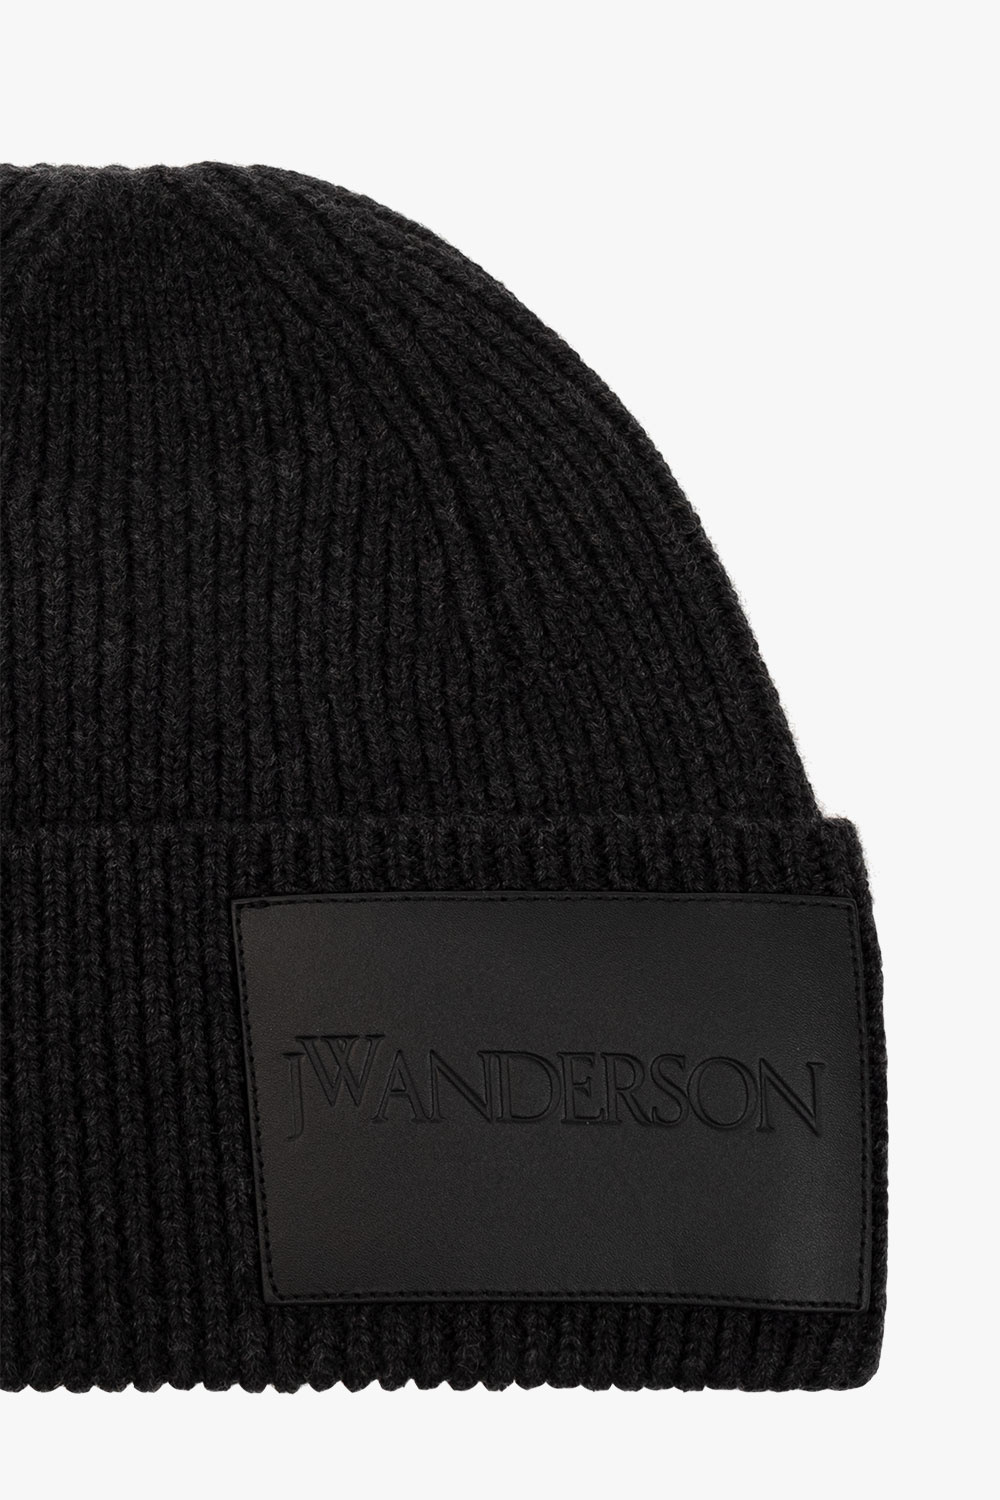 JW Anderson ALLSAINTS KNITTED HAT